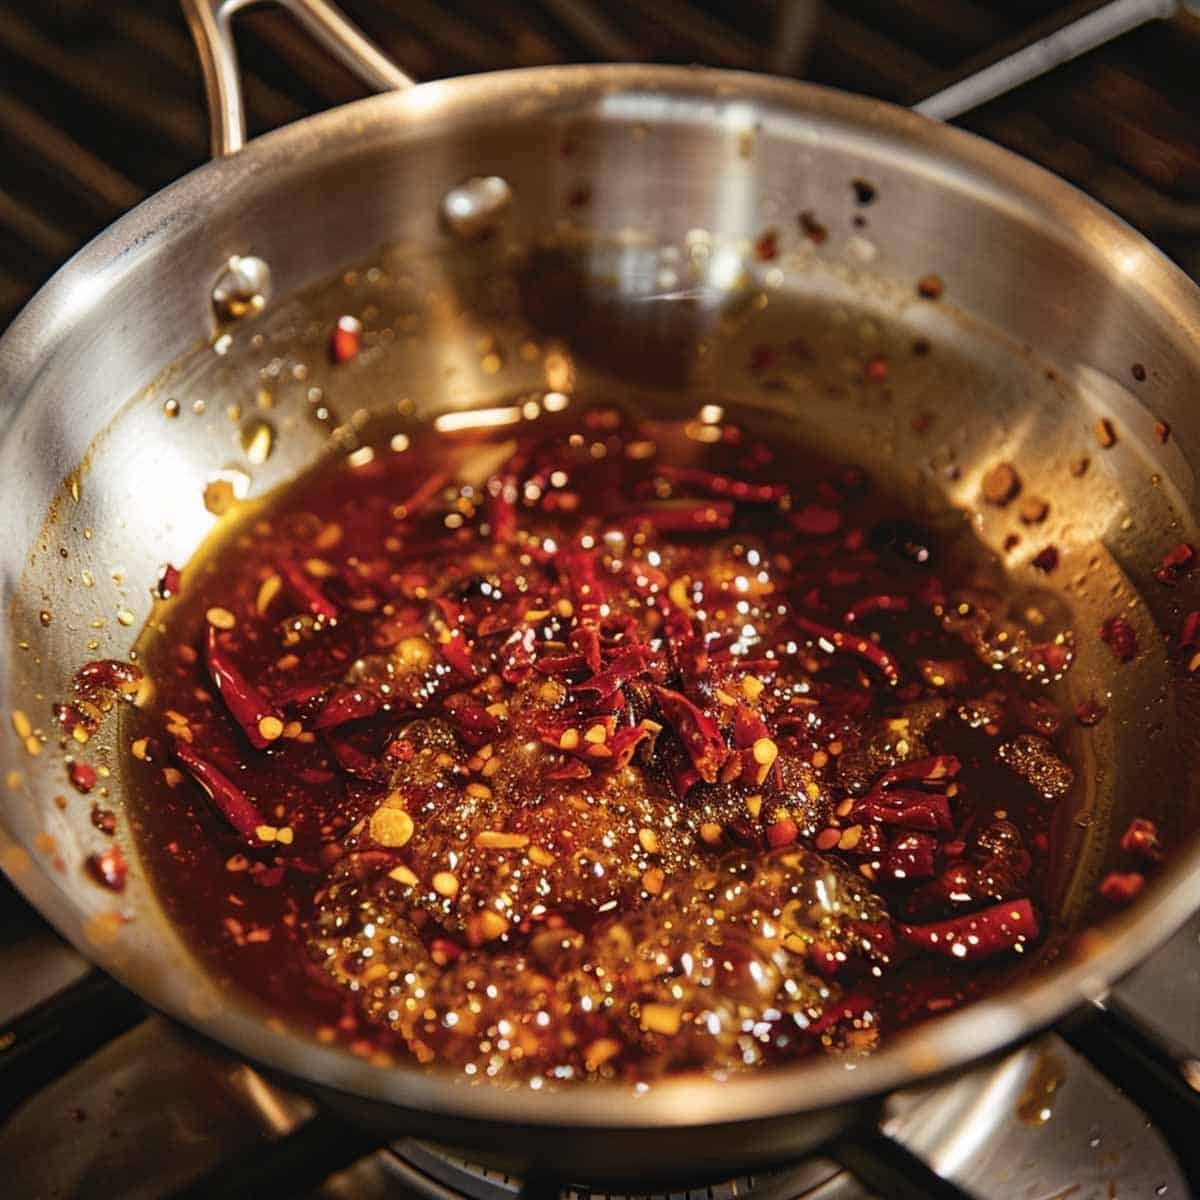 Ingredients for Thai Chili Paste Nam Prik Pao simmer in a stainless steel pan, melding into a rich, aromatic paste.